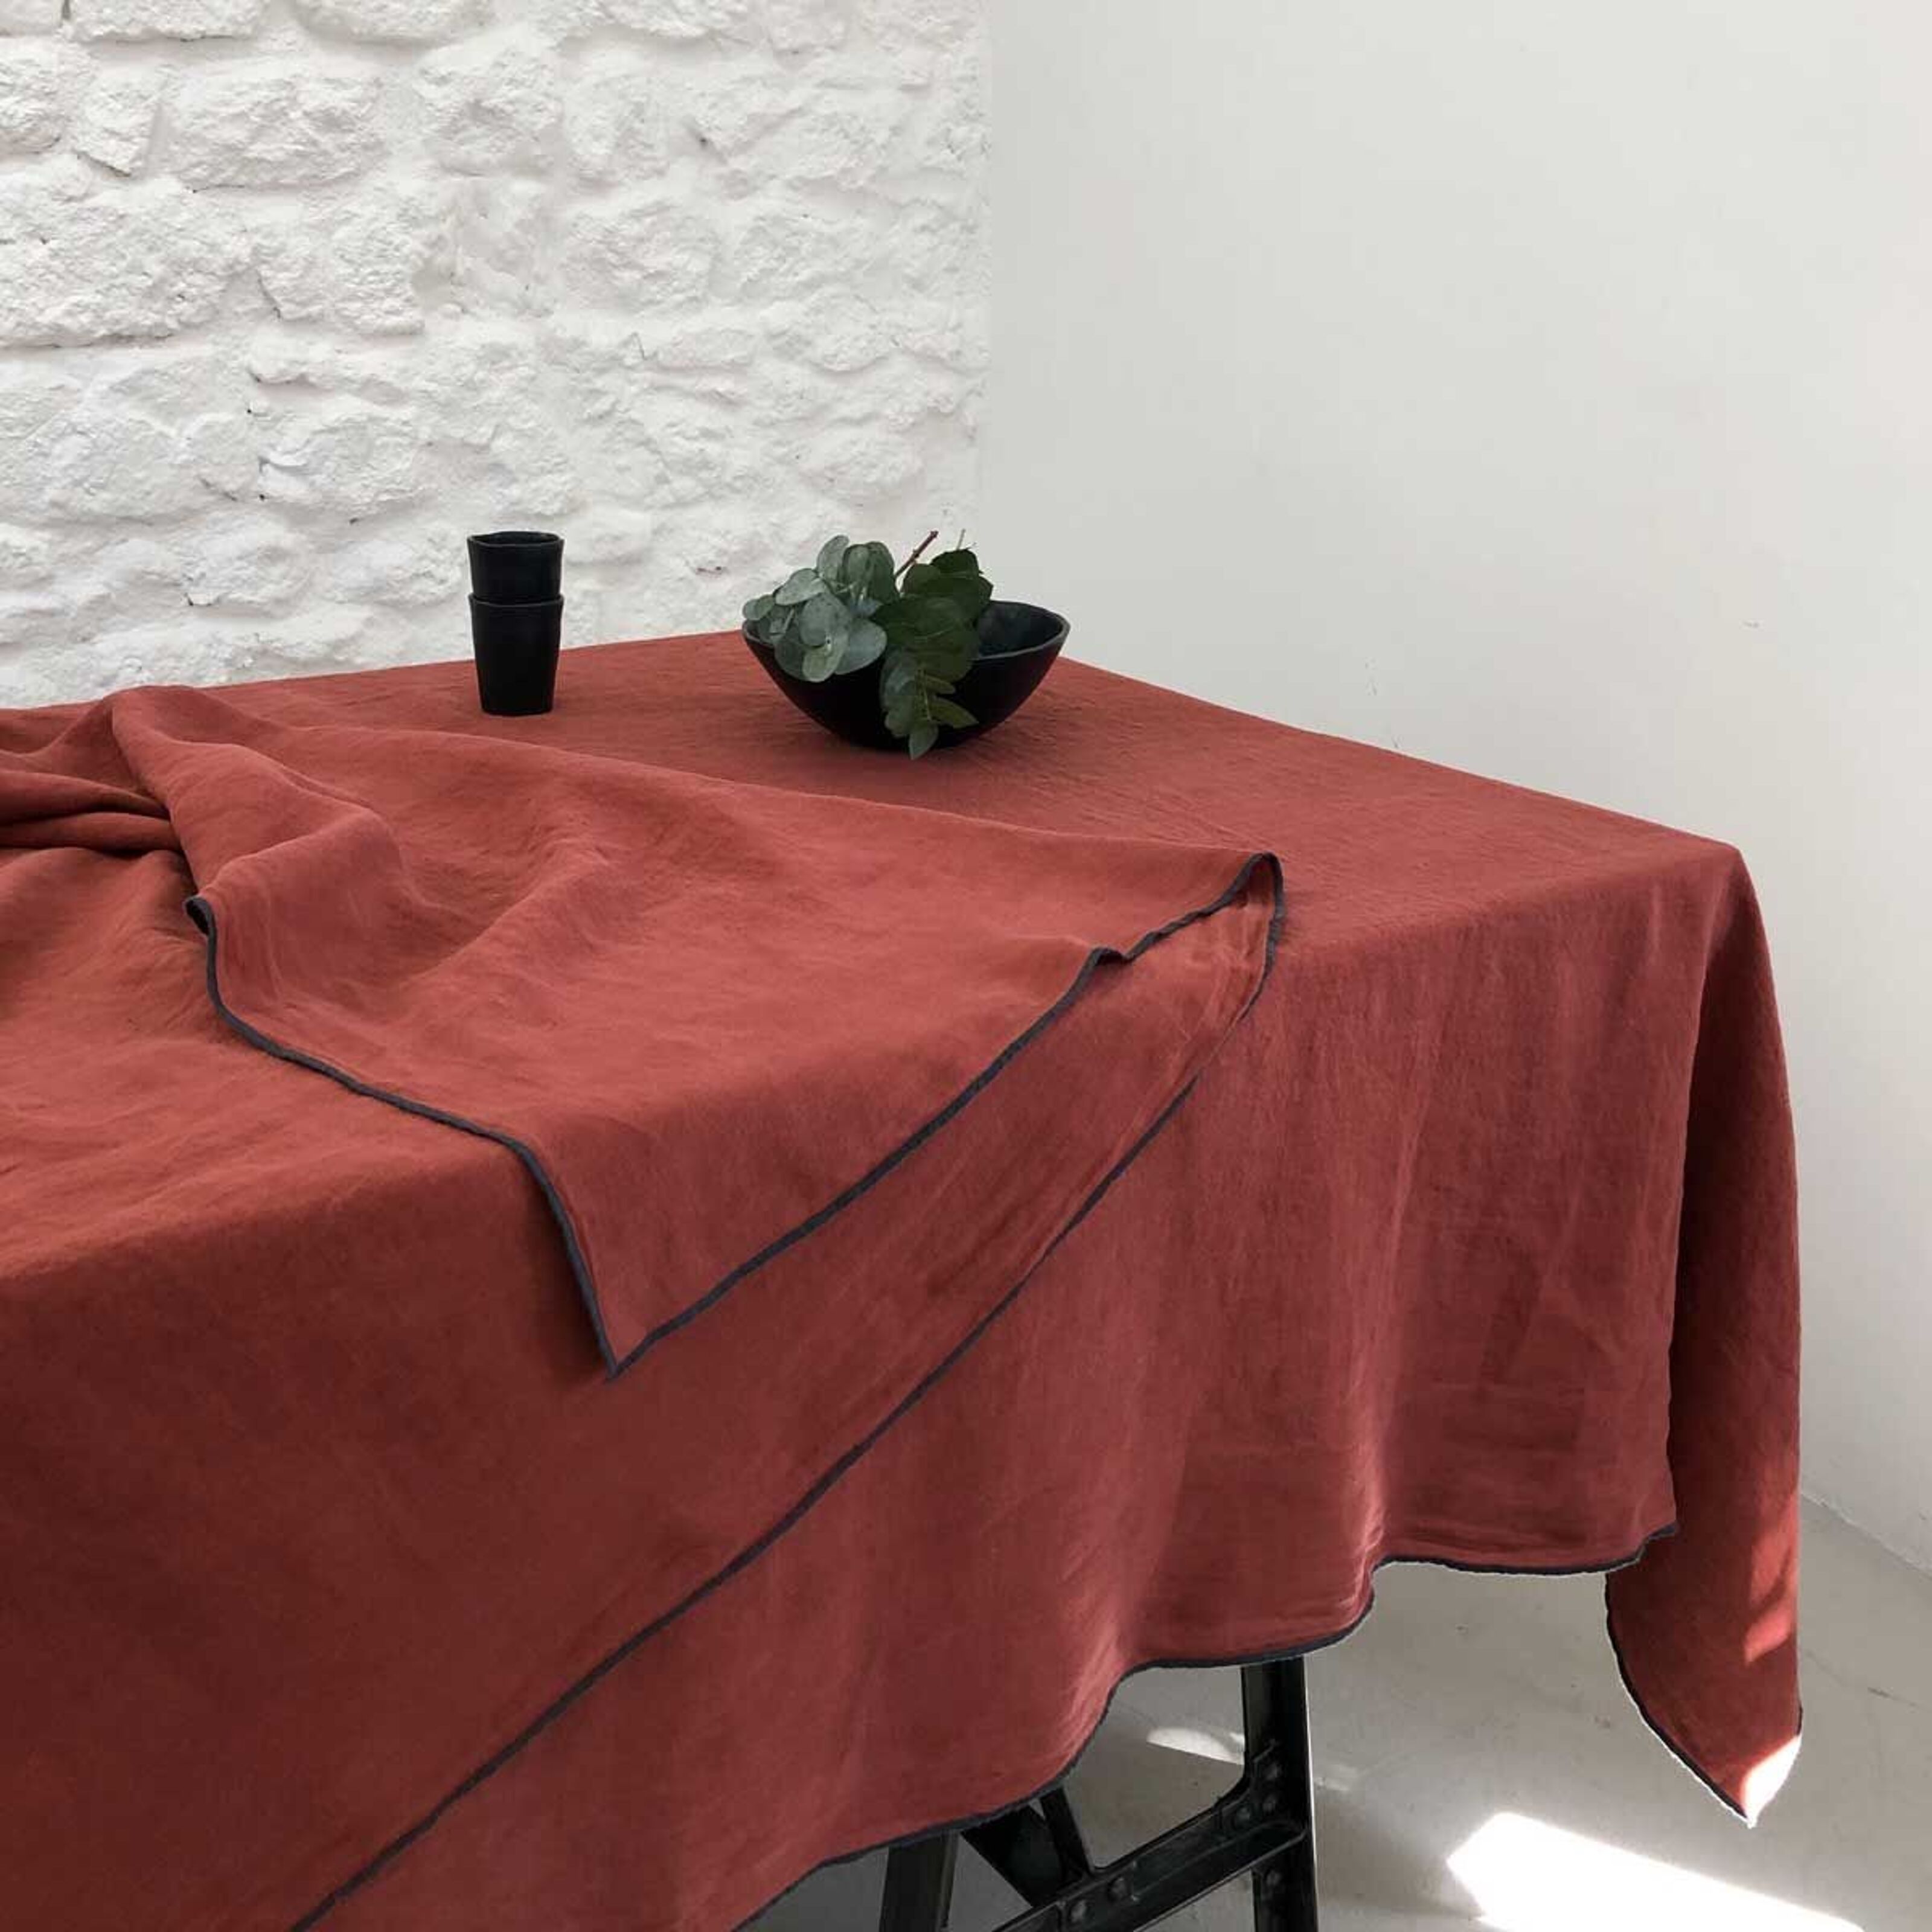 170x300cm Oslo overlock Buy wholesale curtain Vernet washed terracotta - or Passage linen tablecloth